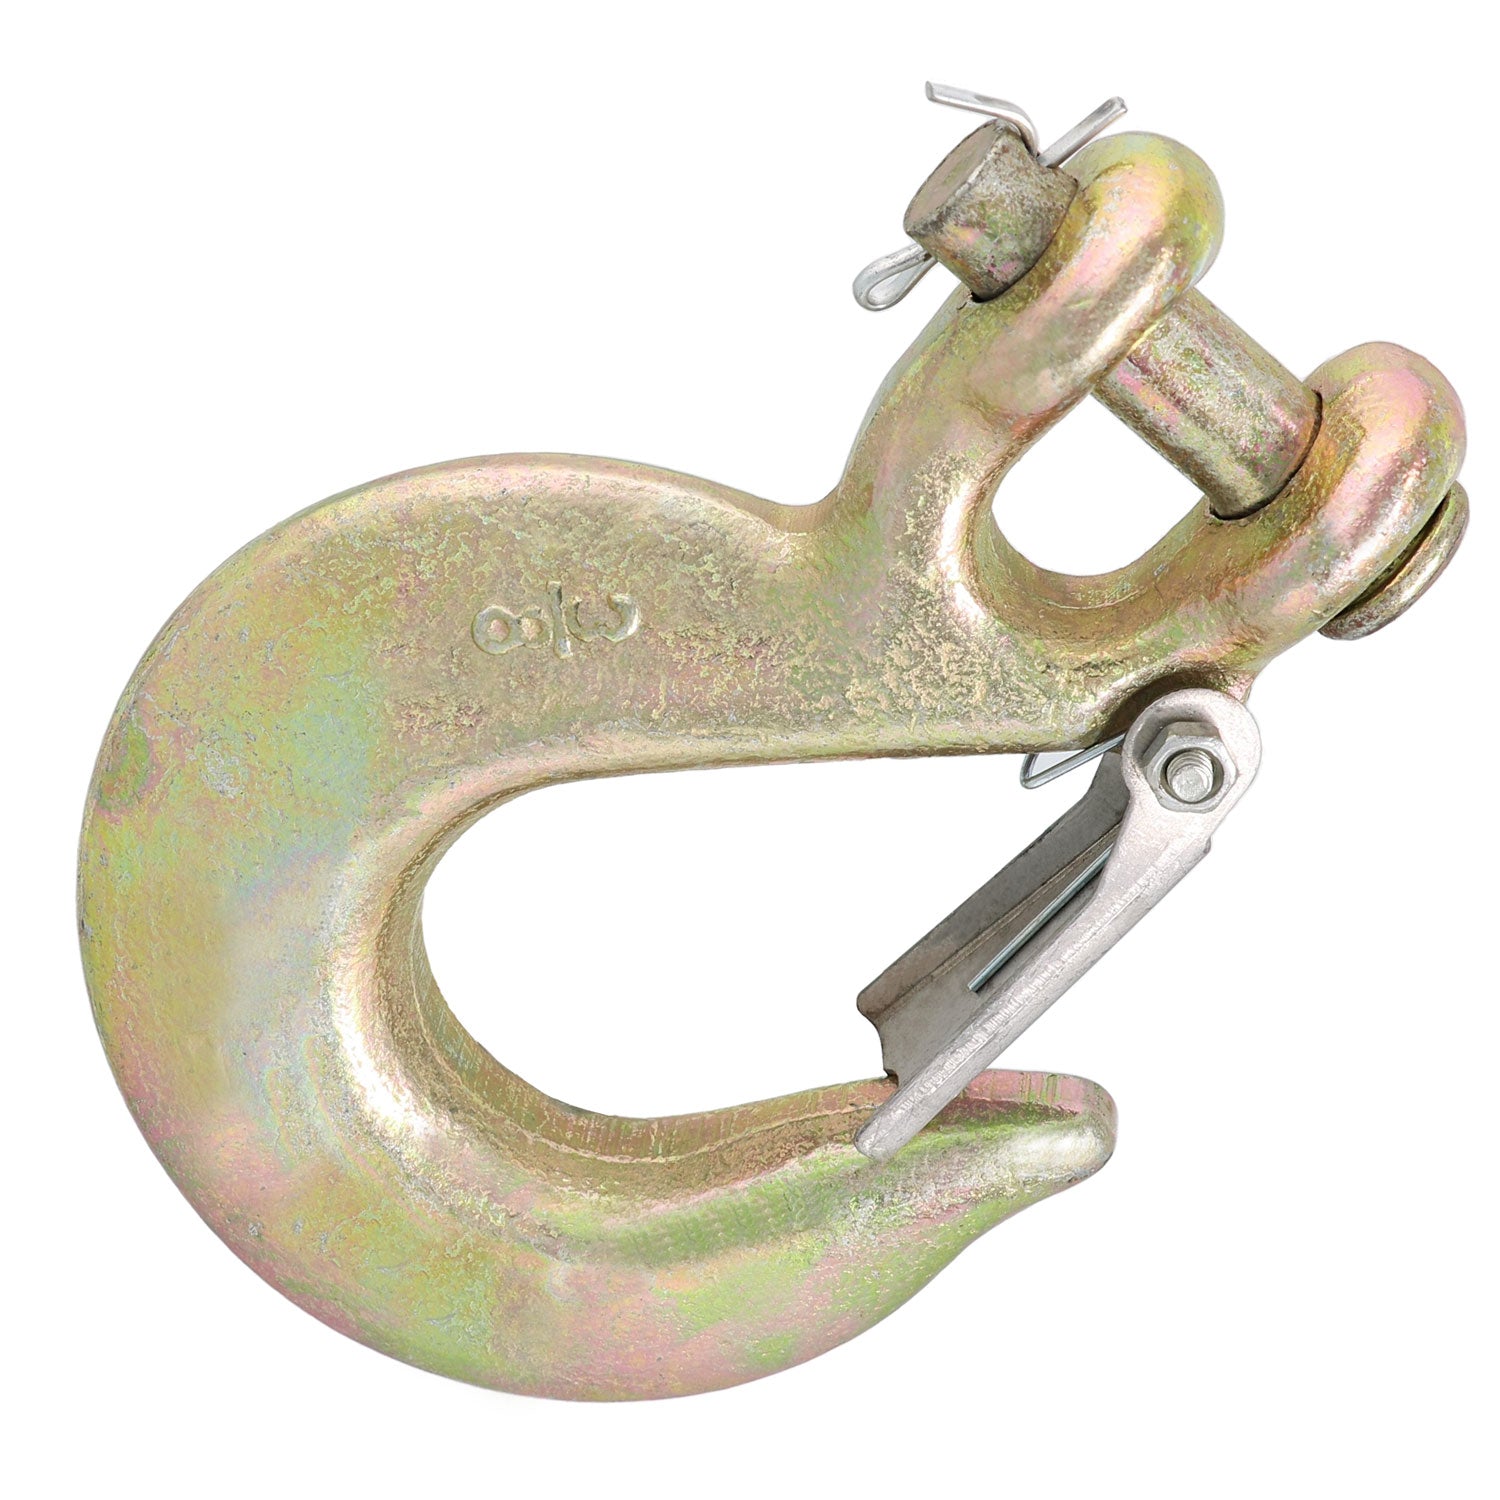 2 Times G70 US Type Clevis Slip Hook With Latch for hoisting in